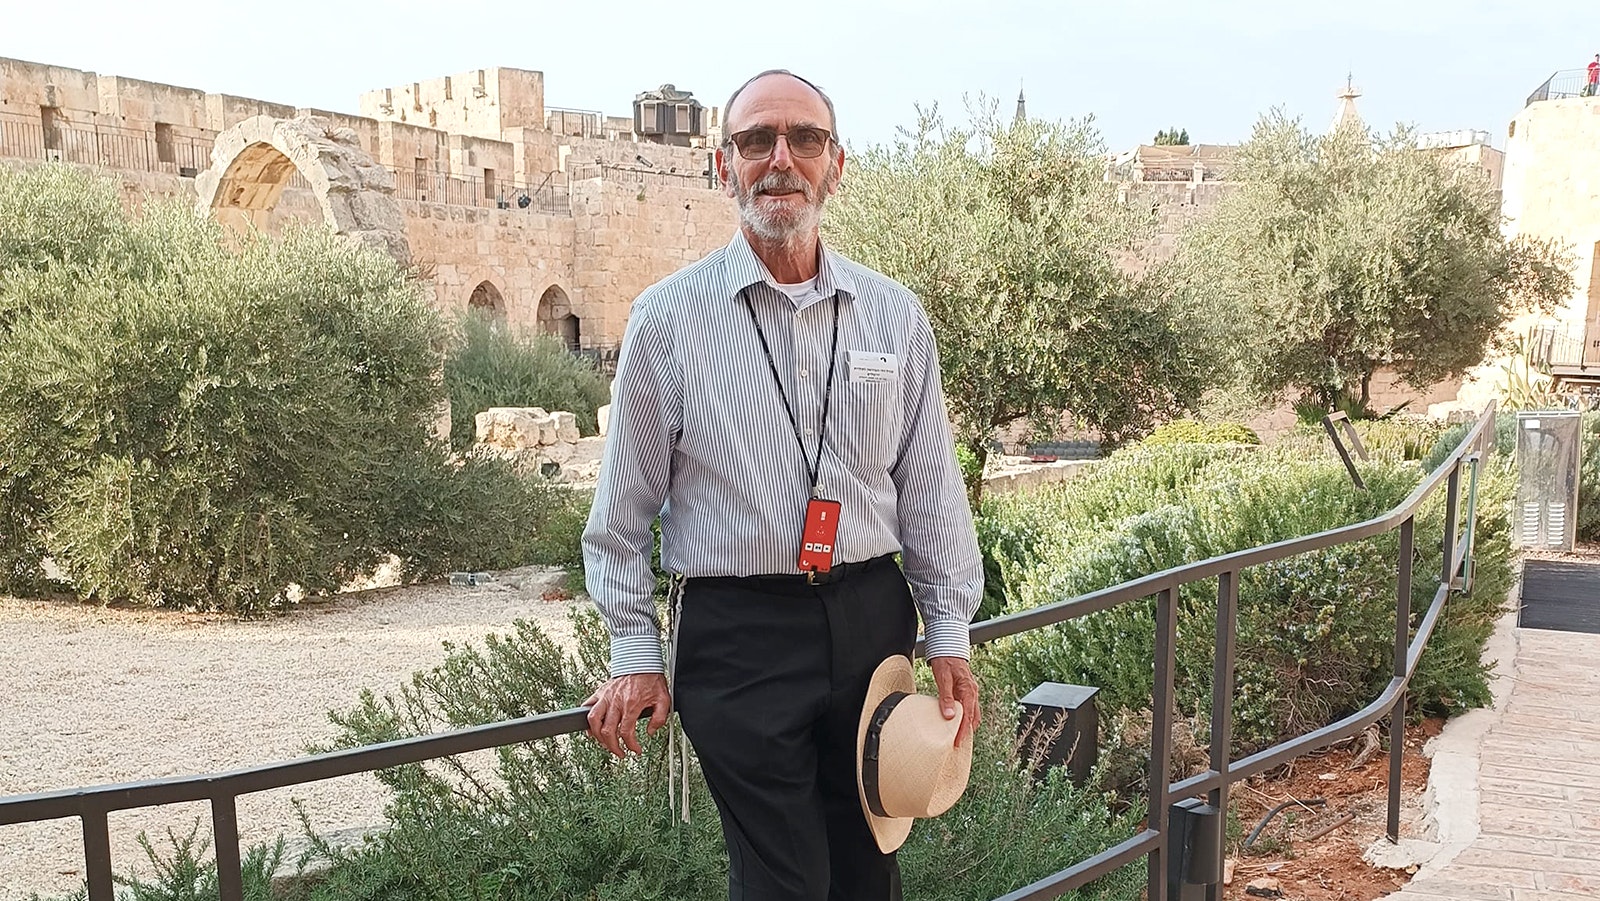 Mike Krampner is a former Wyoming attorney who now lives in Jerusalem, Israel.